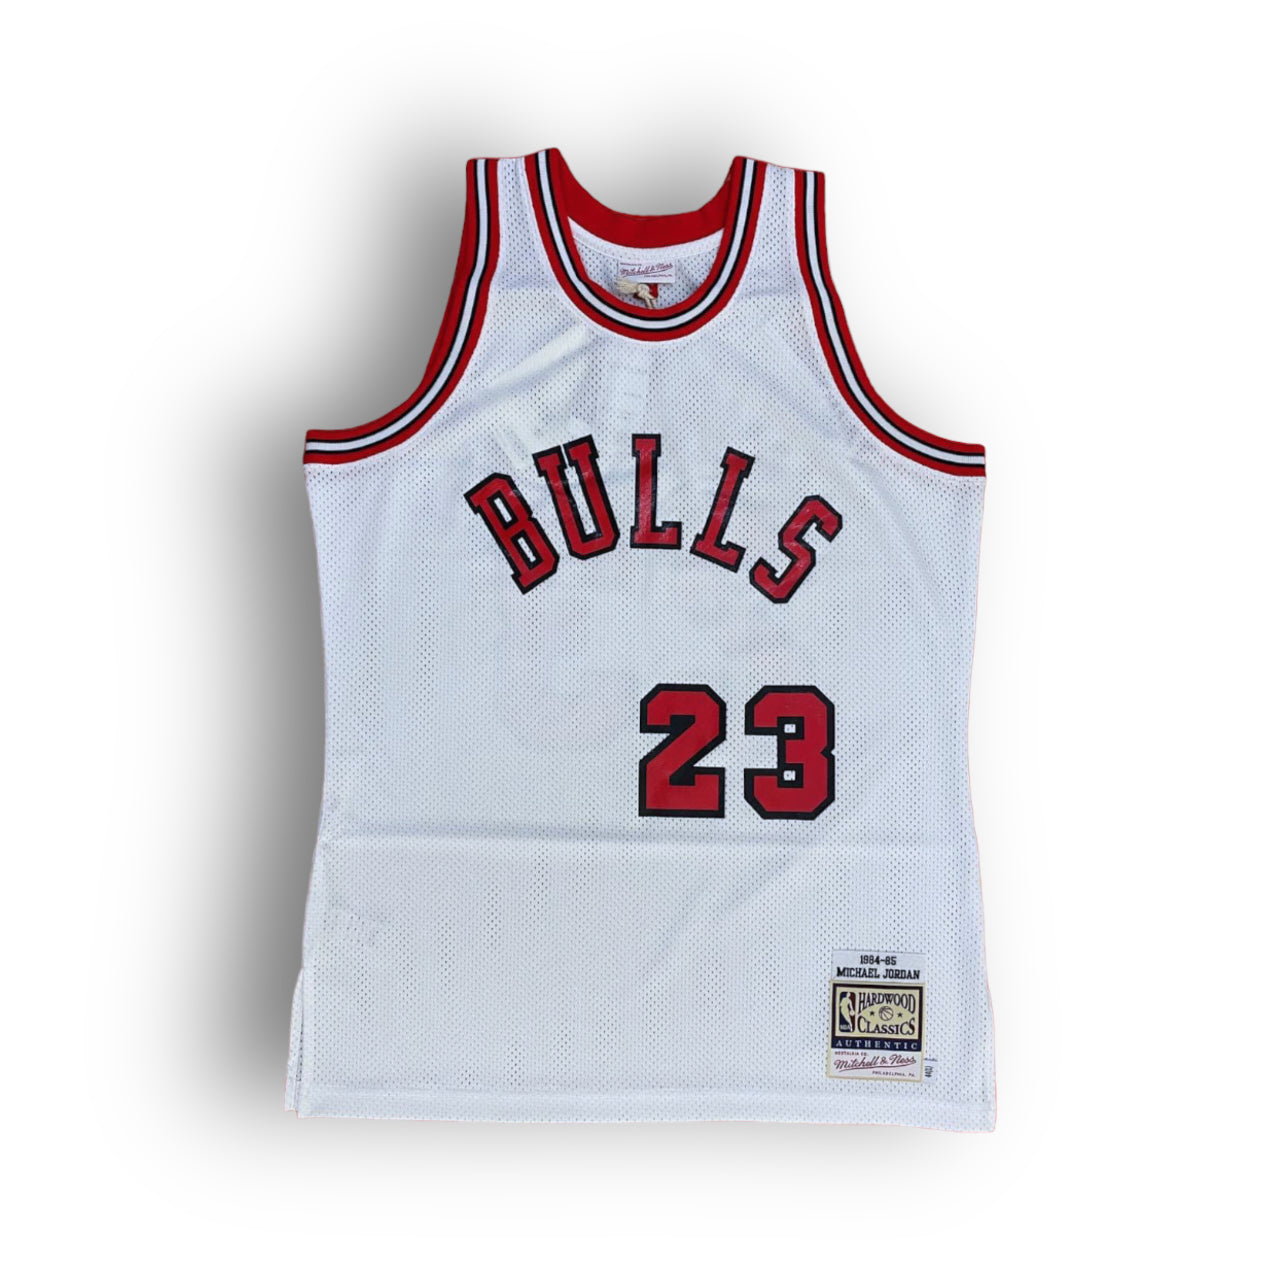 Mitchell & Ness Michael Jordan 84-85 Chicago Bulls 23 "Rookie Year" Home Authentic Jersey - White - Hoop Jersey Store